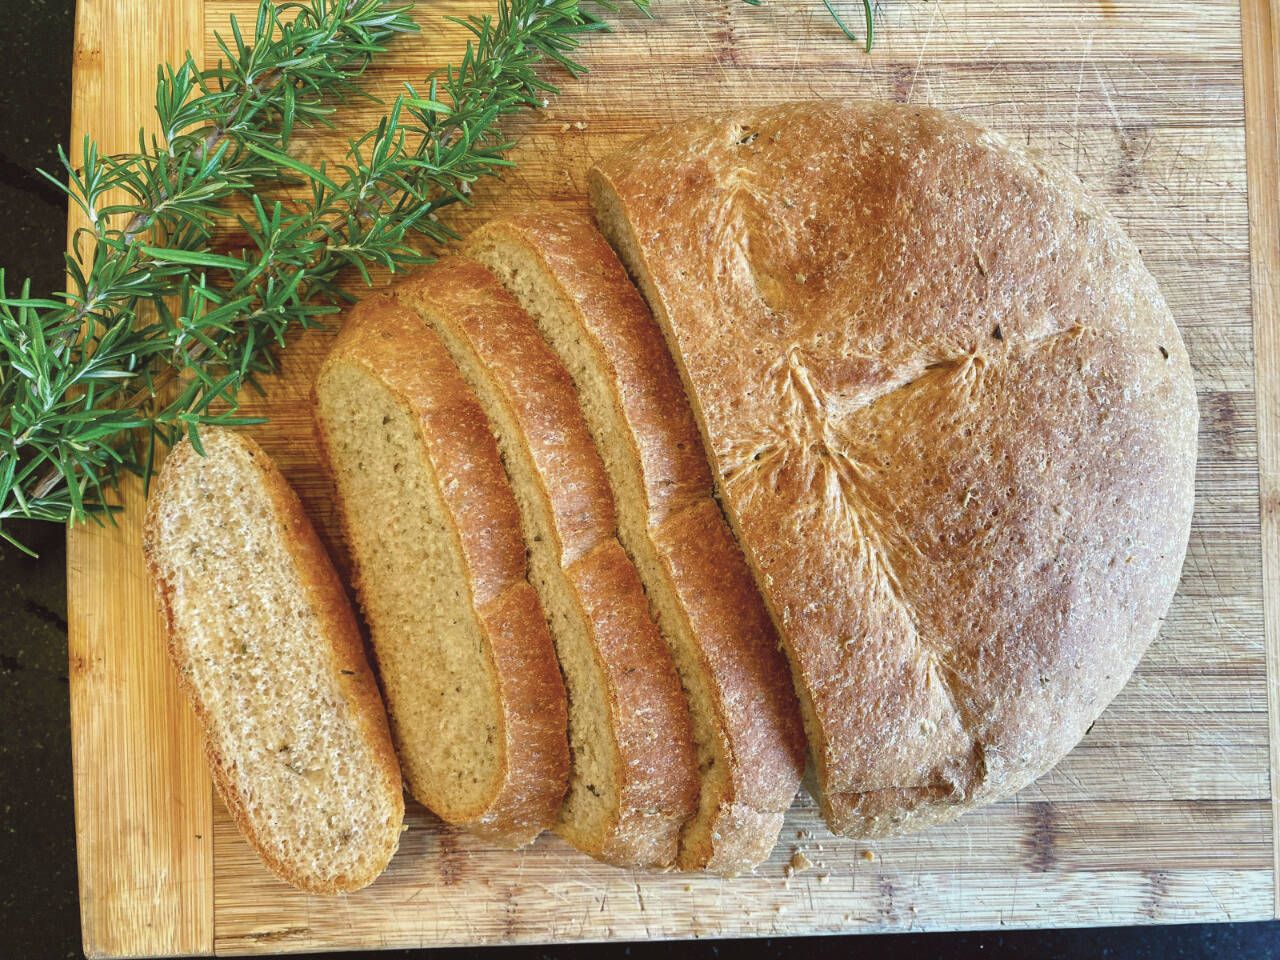 This loaf of rosemary bread was over-proofed, due to a warm kitchen, but luckily was still delicious with a dinner of roast beef, carrots and potatoes. (Photo by Tressa Dale)